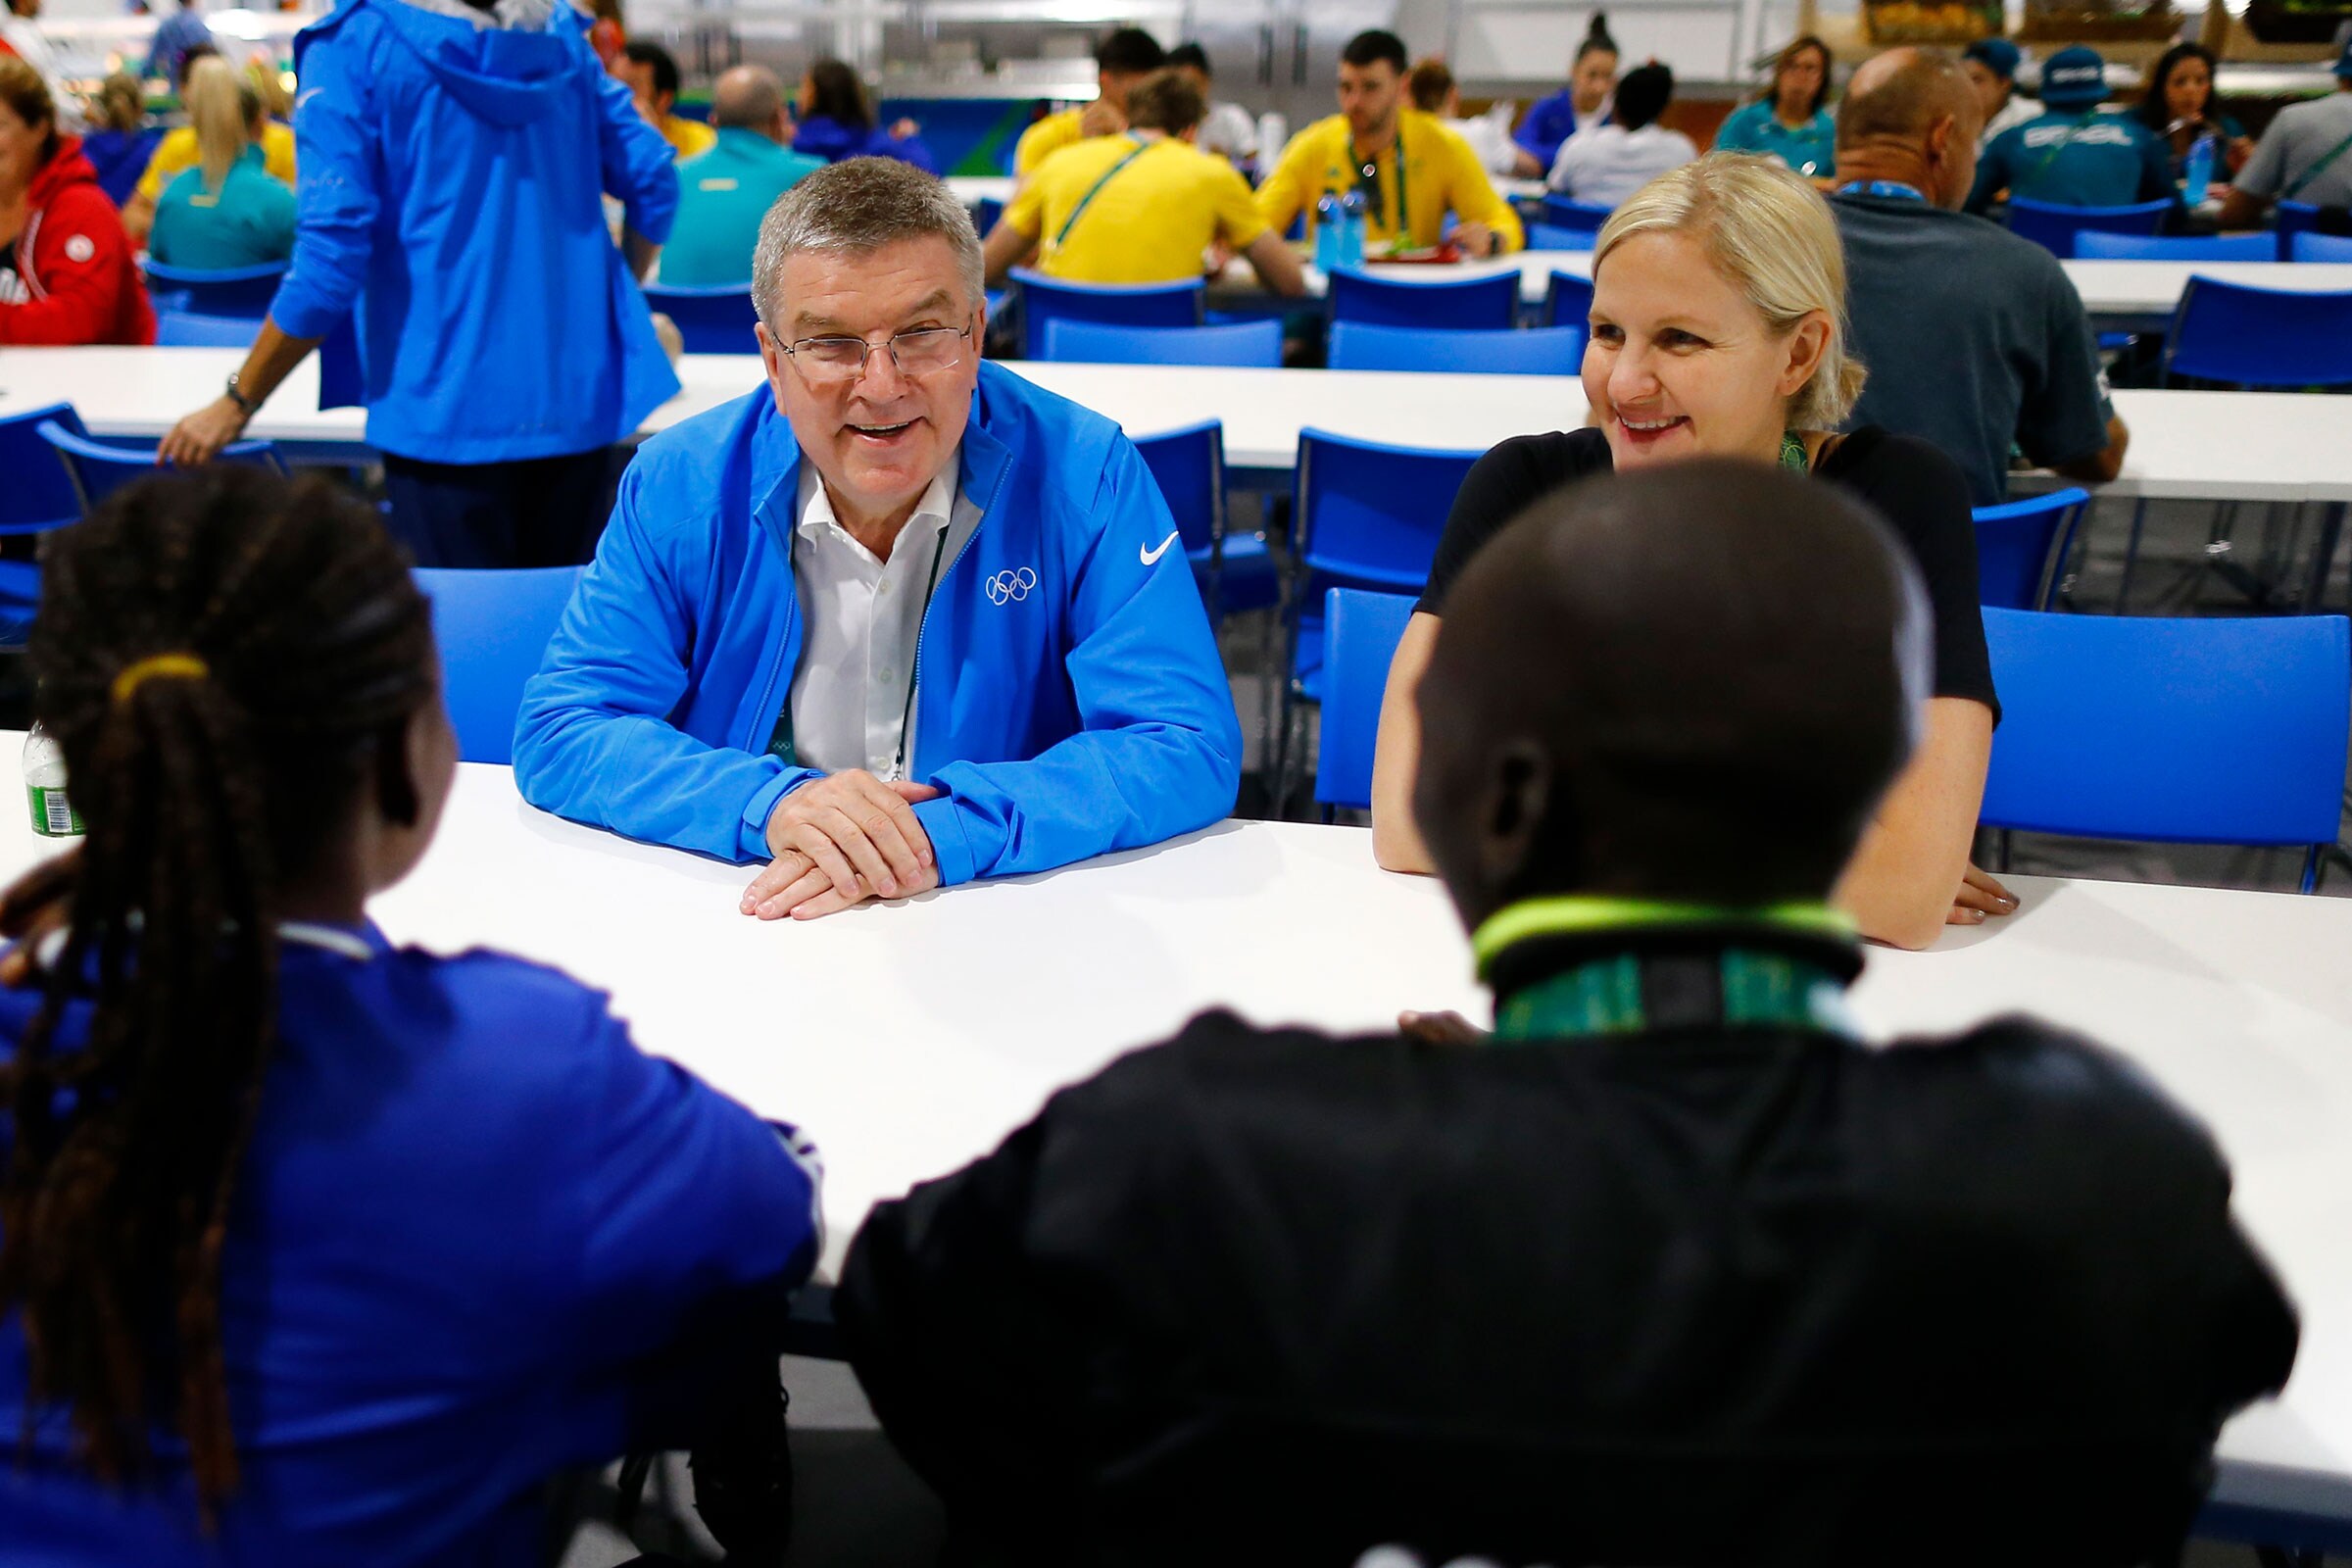 IOC President Thomas Bach, IOC member Kirsty Coventry meet with two athletes in the Olympic village in Rio de Janeiro, Brazil.